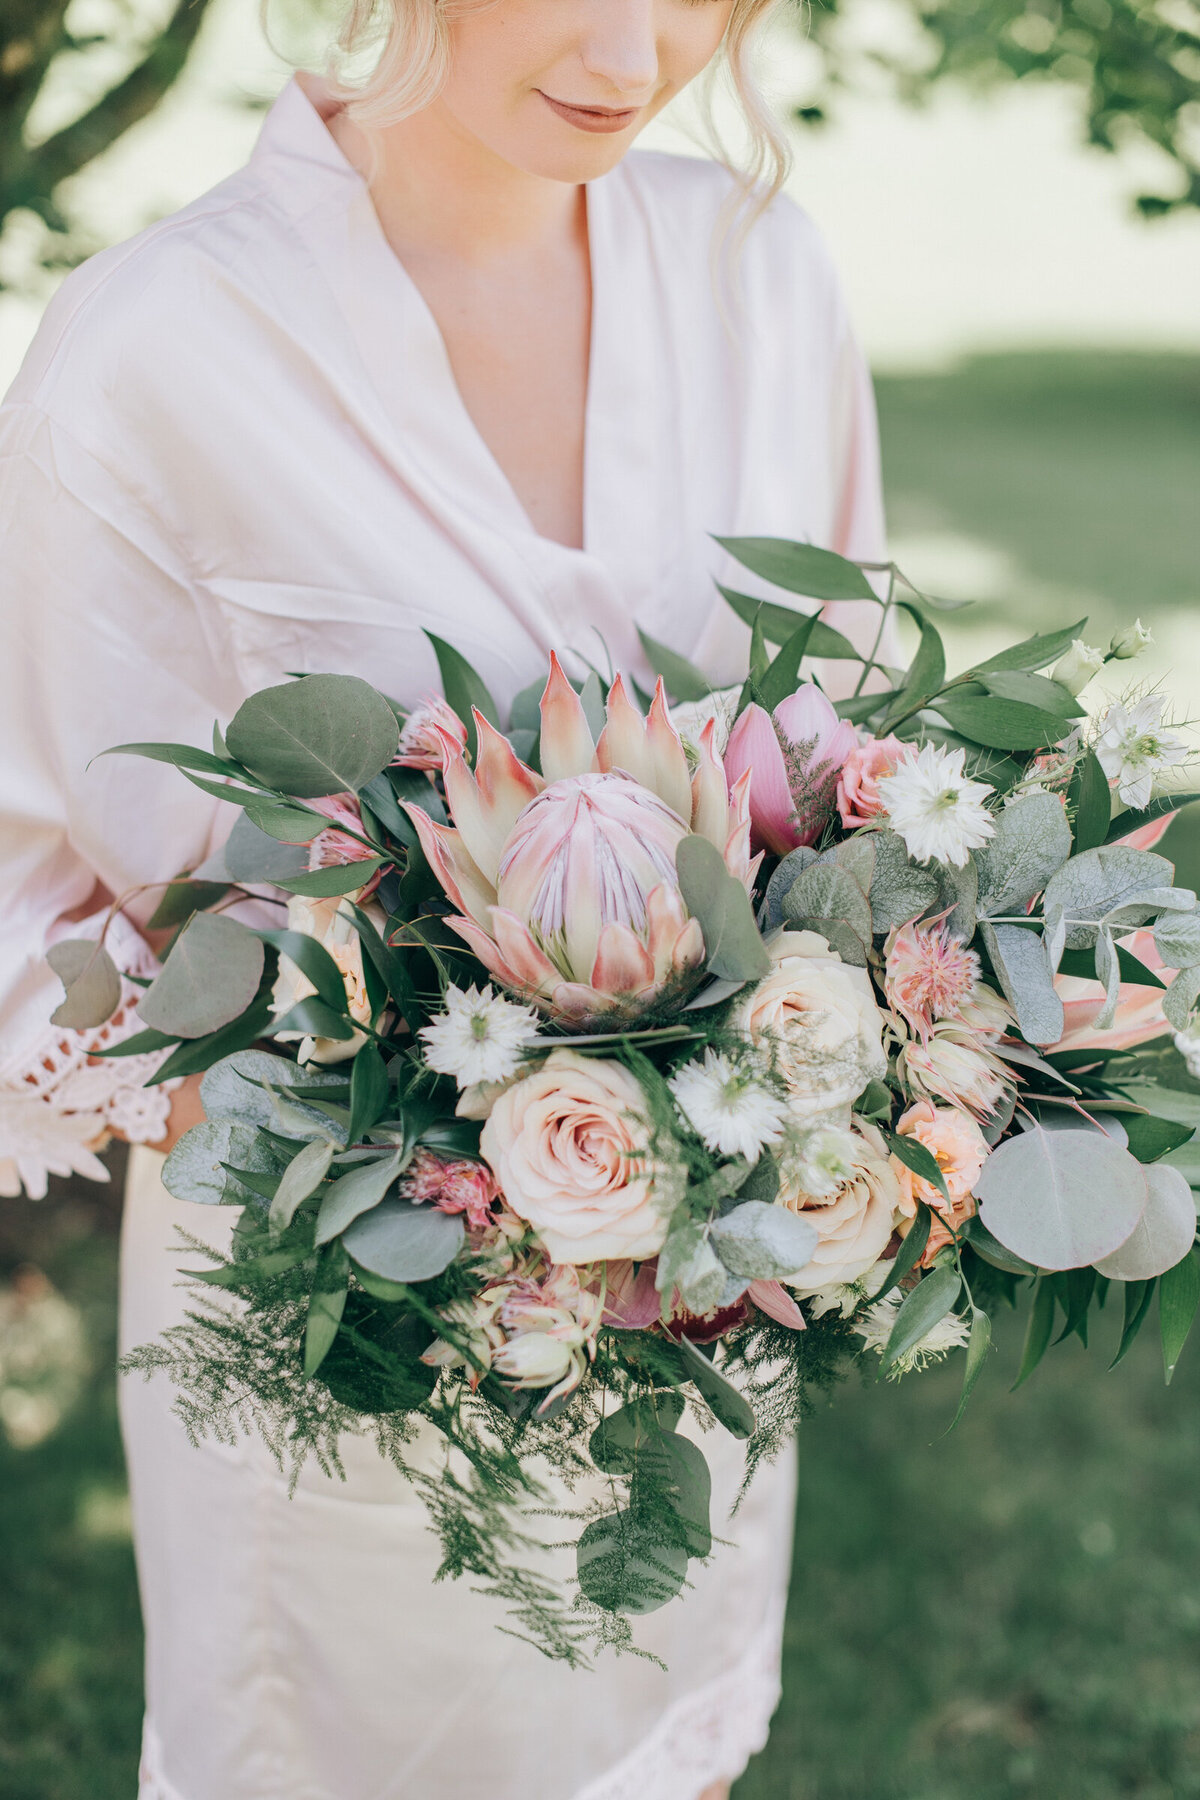 A whimsical wedding bouquet with exotic pink flowers, ivory roses and green eucalyptus